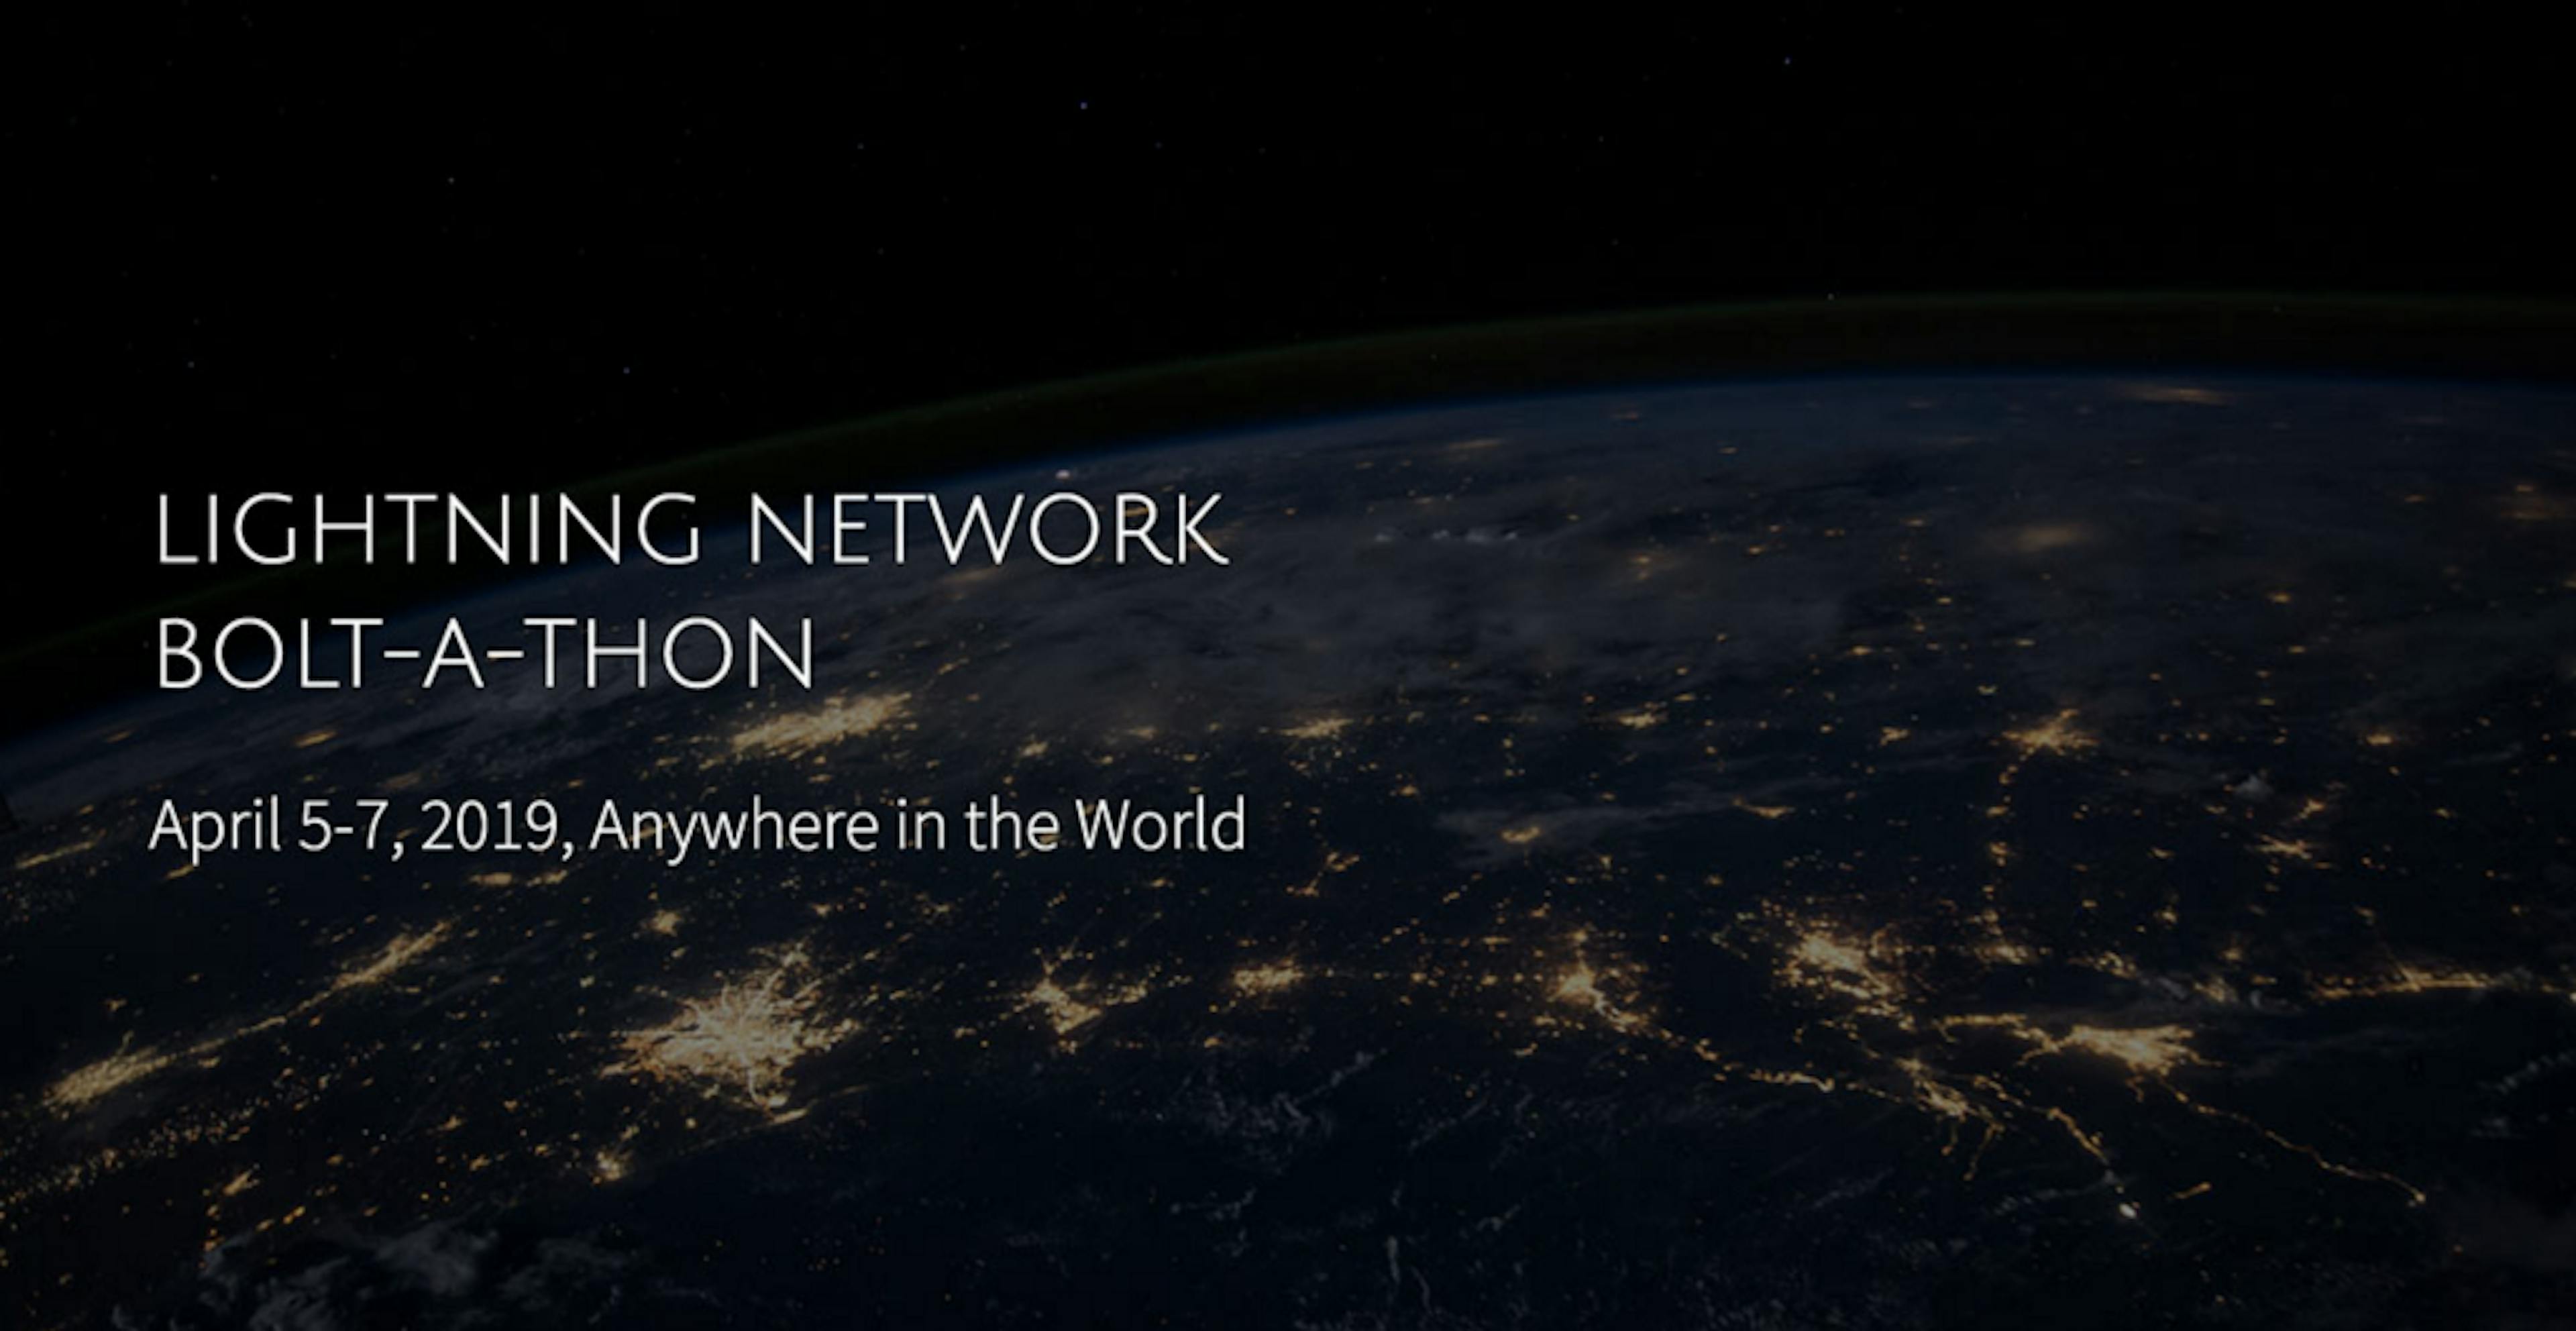 /bolt-a-thon-worlds-first-online-lightning-network-conference-and-hackathon-83782960f65 feature image